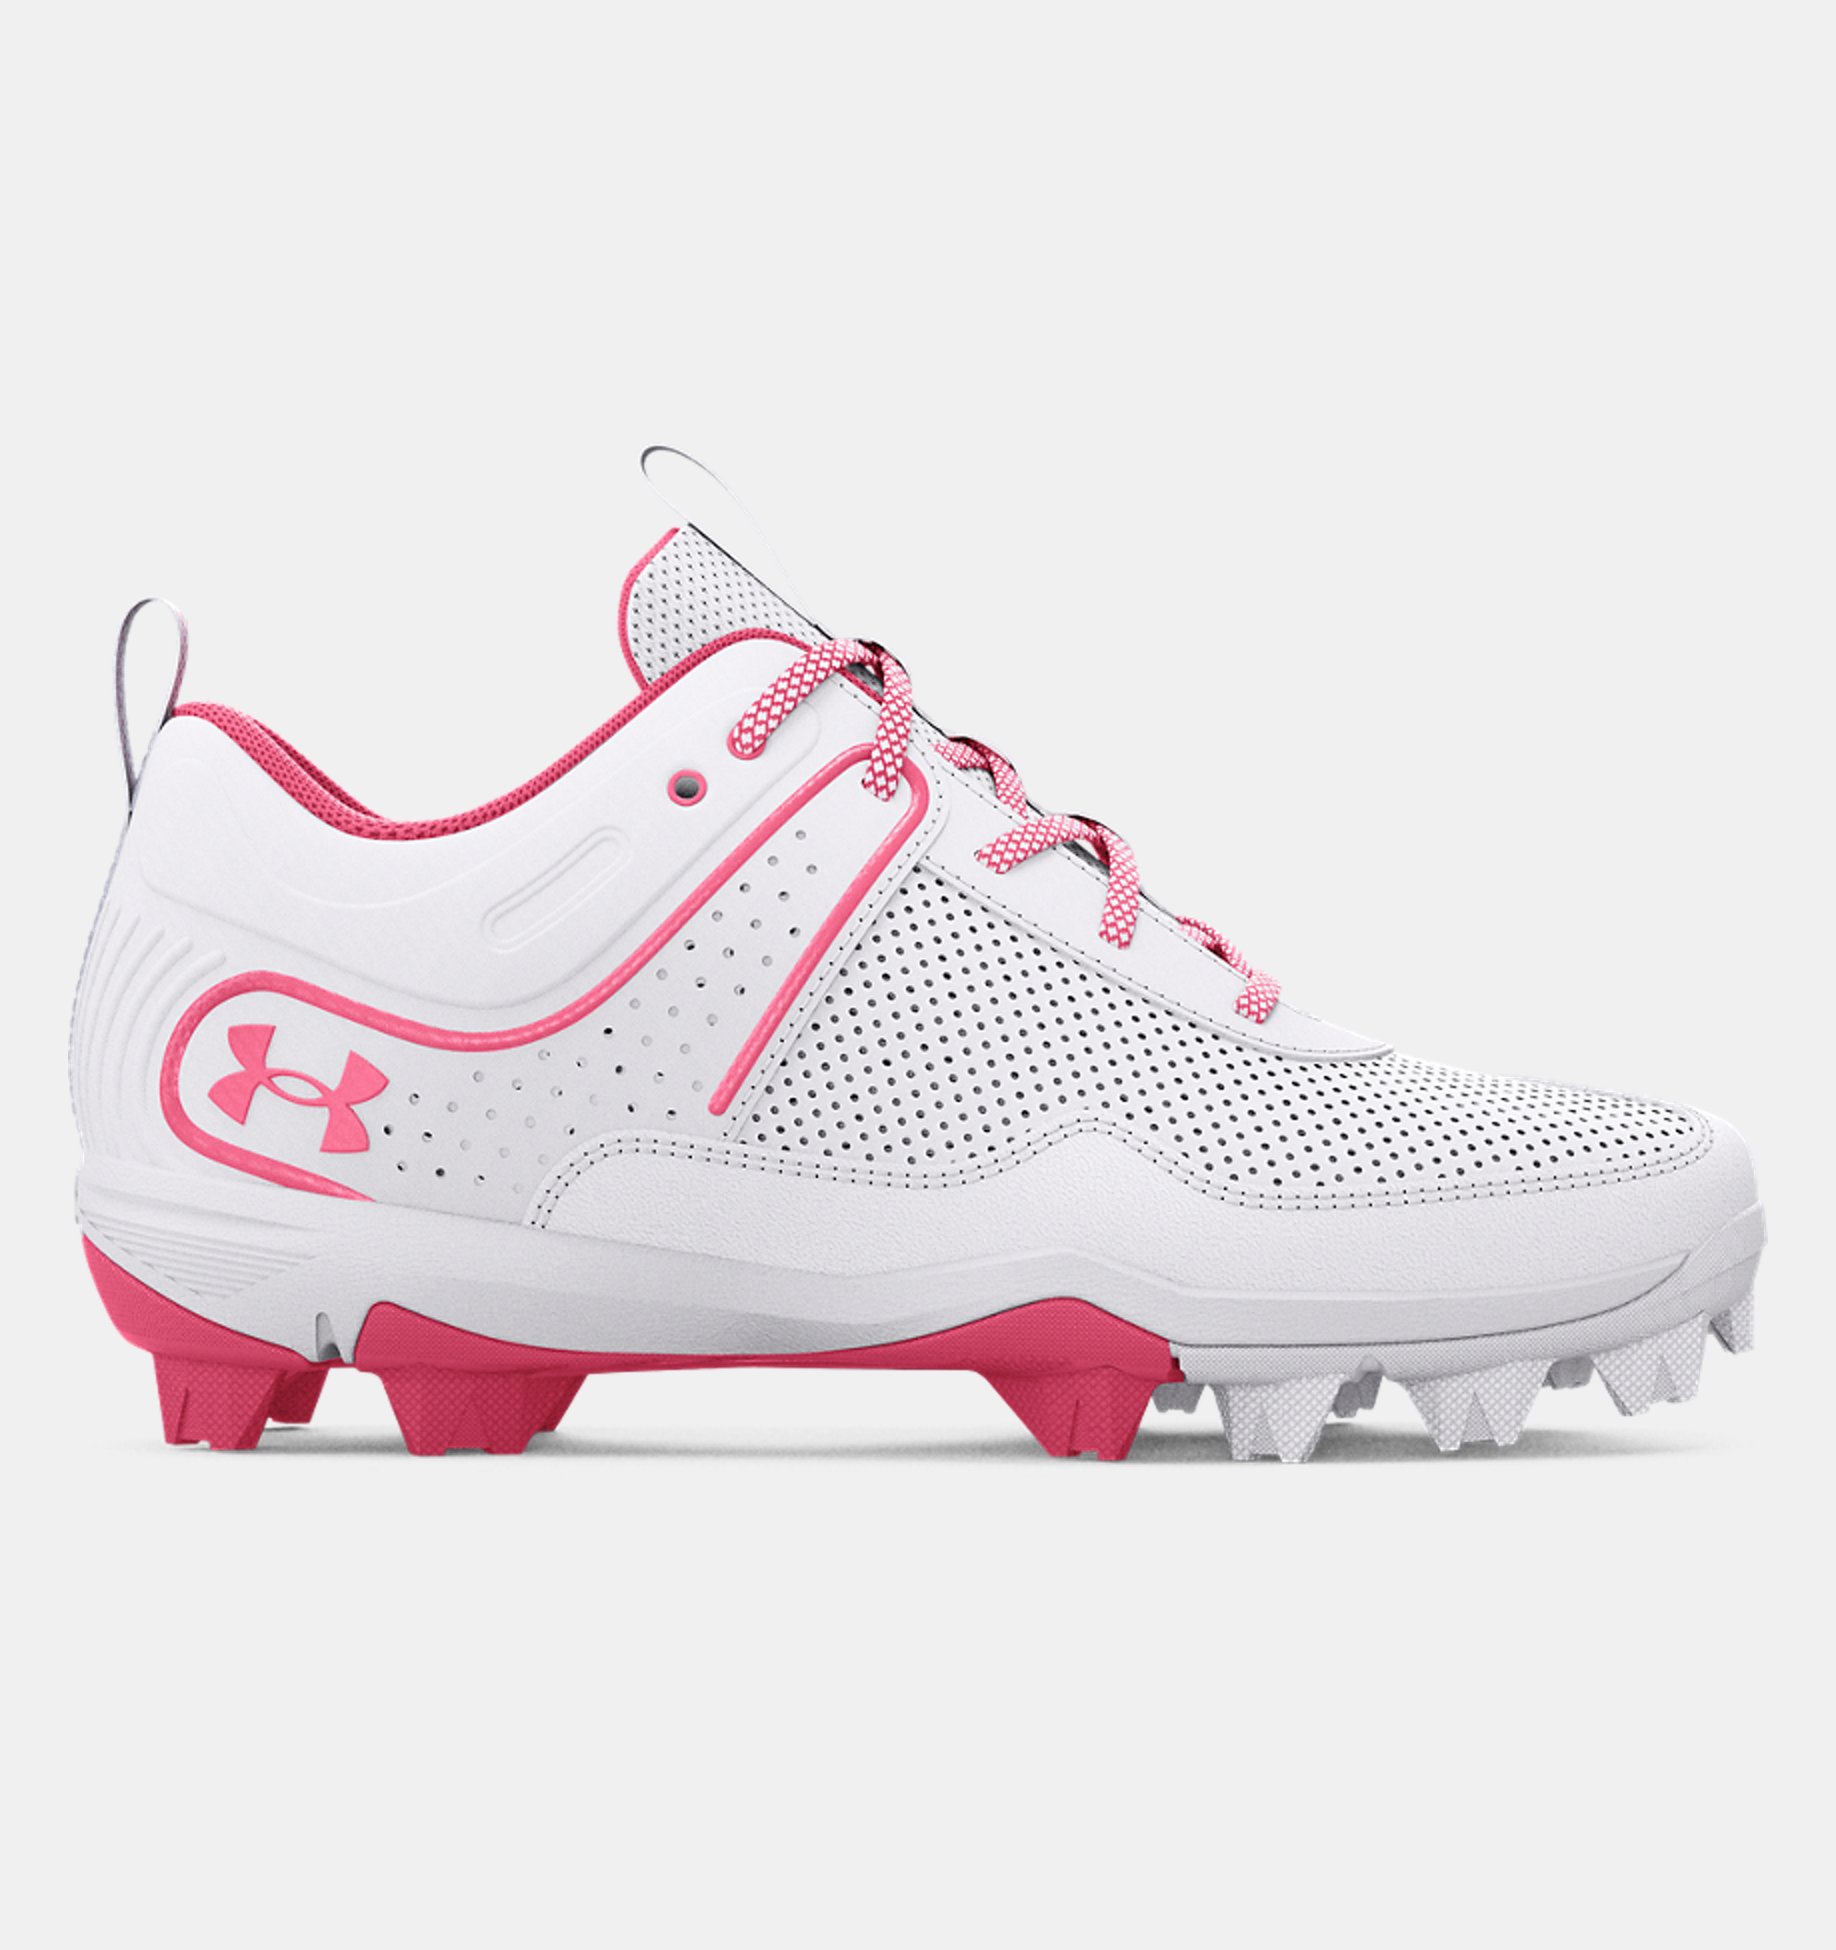 Pink And Grey Size 10K Under Armour Girl's Softball Cleats 